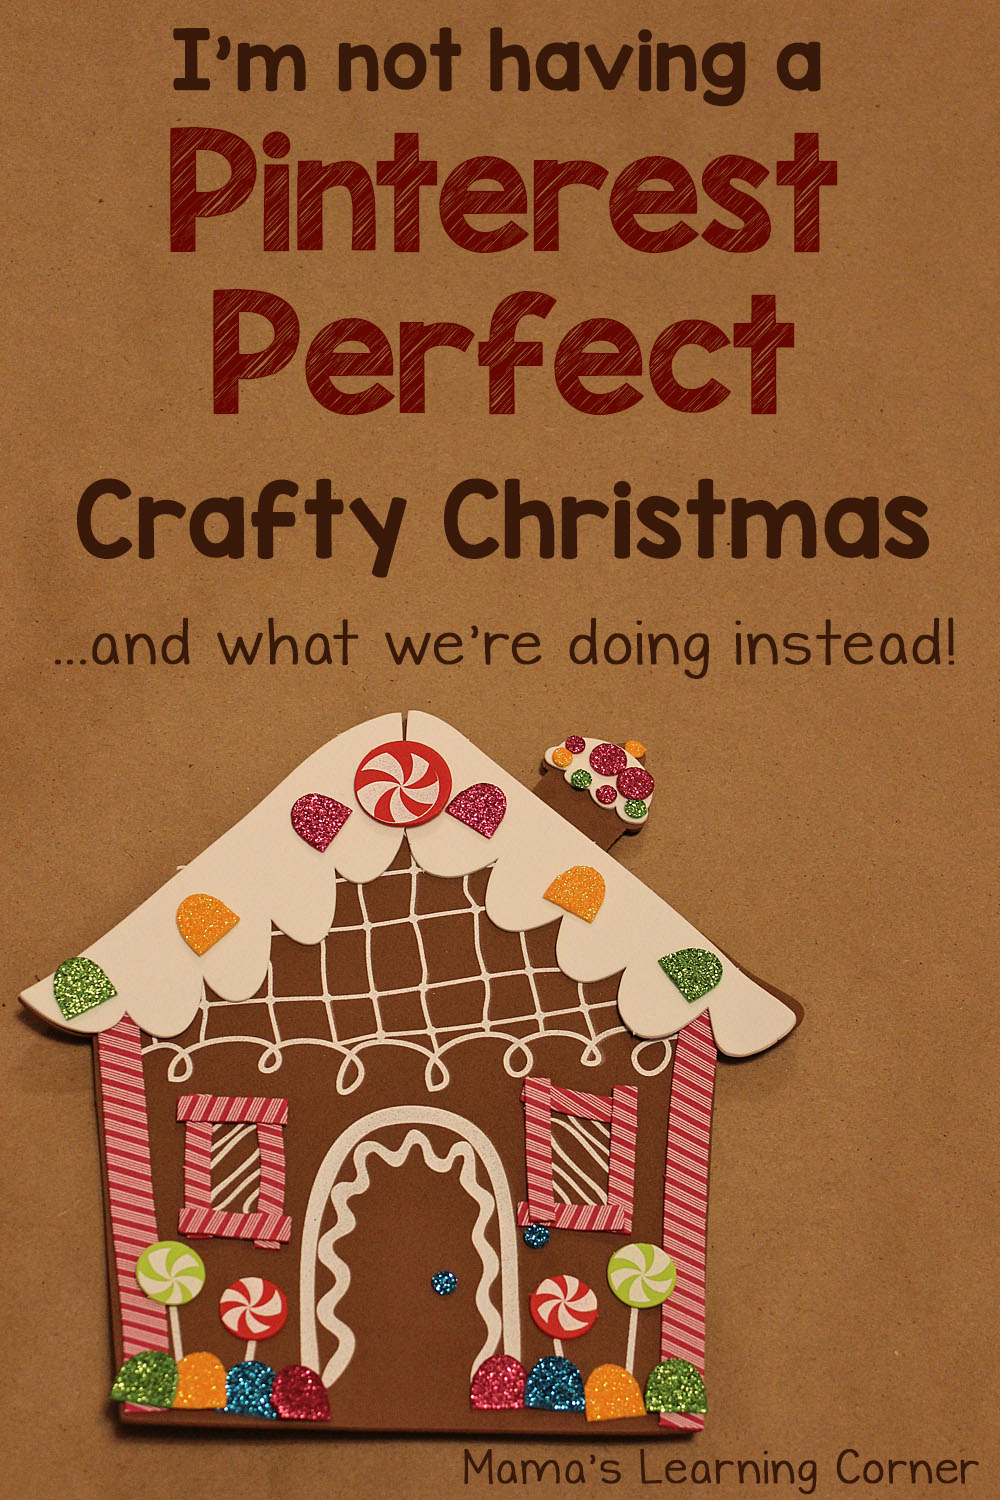 I'm not having a Pinterest Perfect Crafty Christmas - and what we're doing instead!